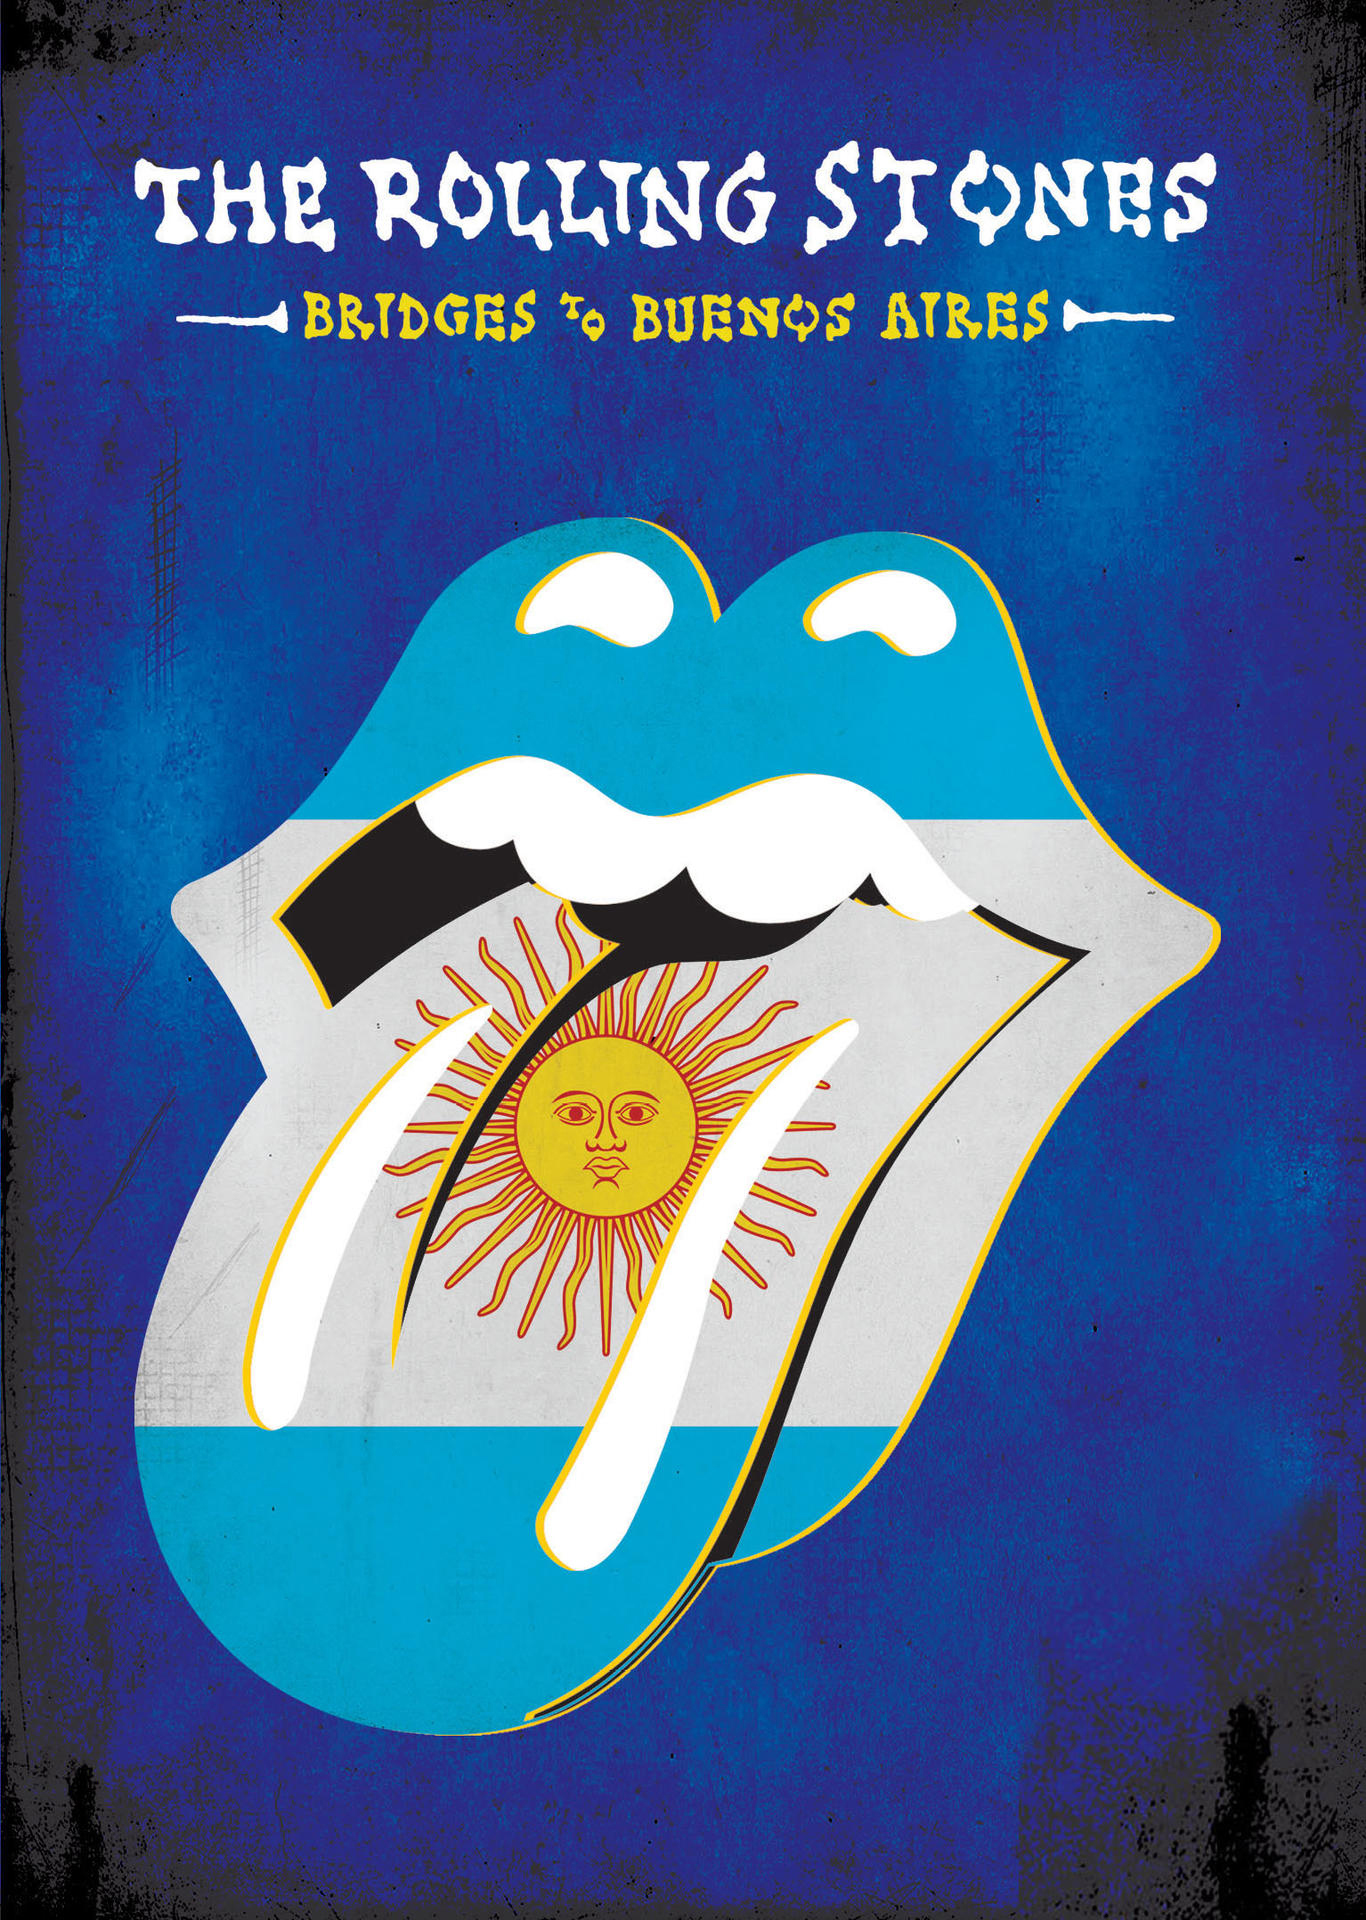 Stones Buenos Aires Bridges (DVD) - - To The Rolling